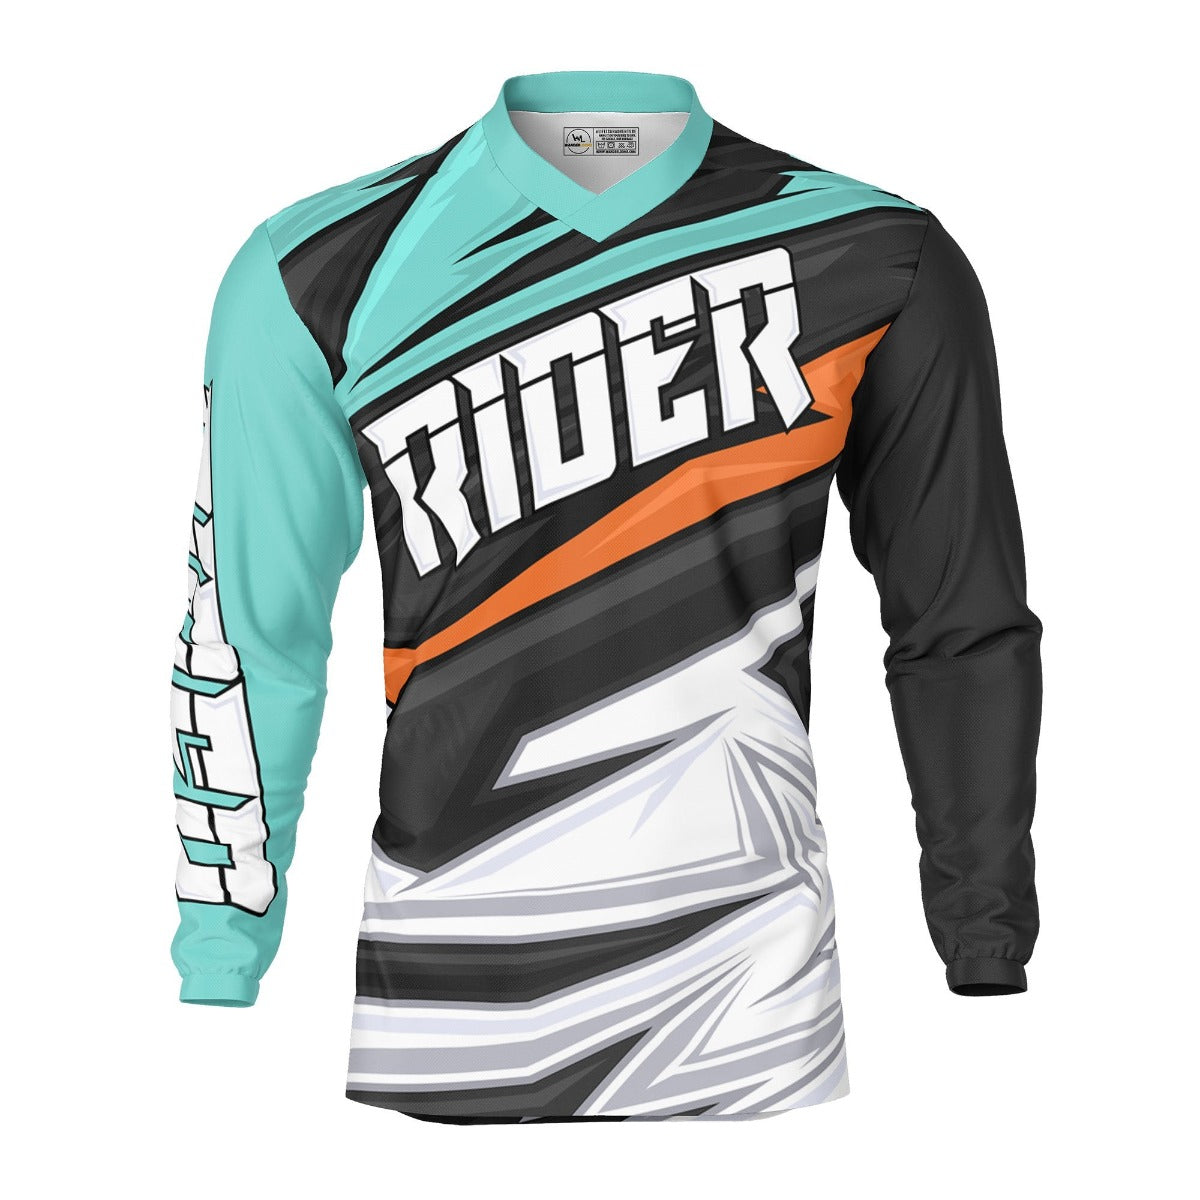 Absolute Rider Jersey 6